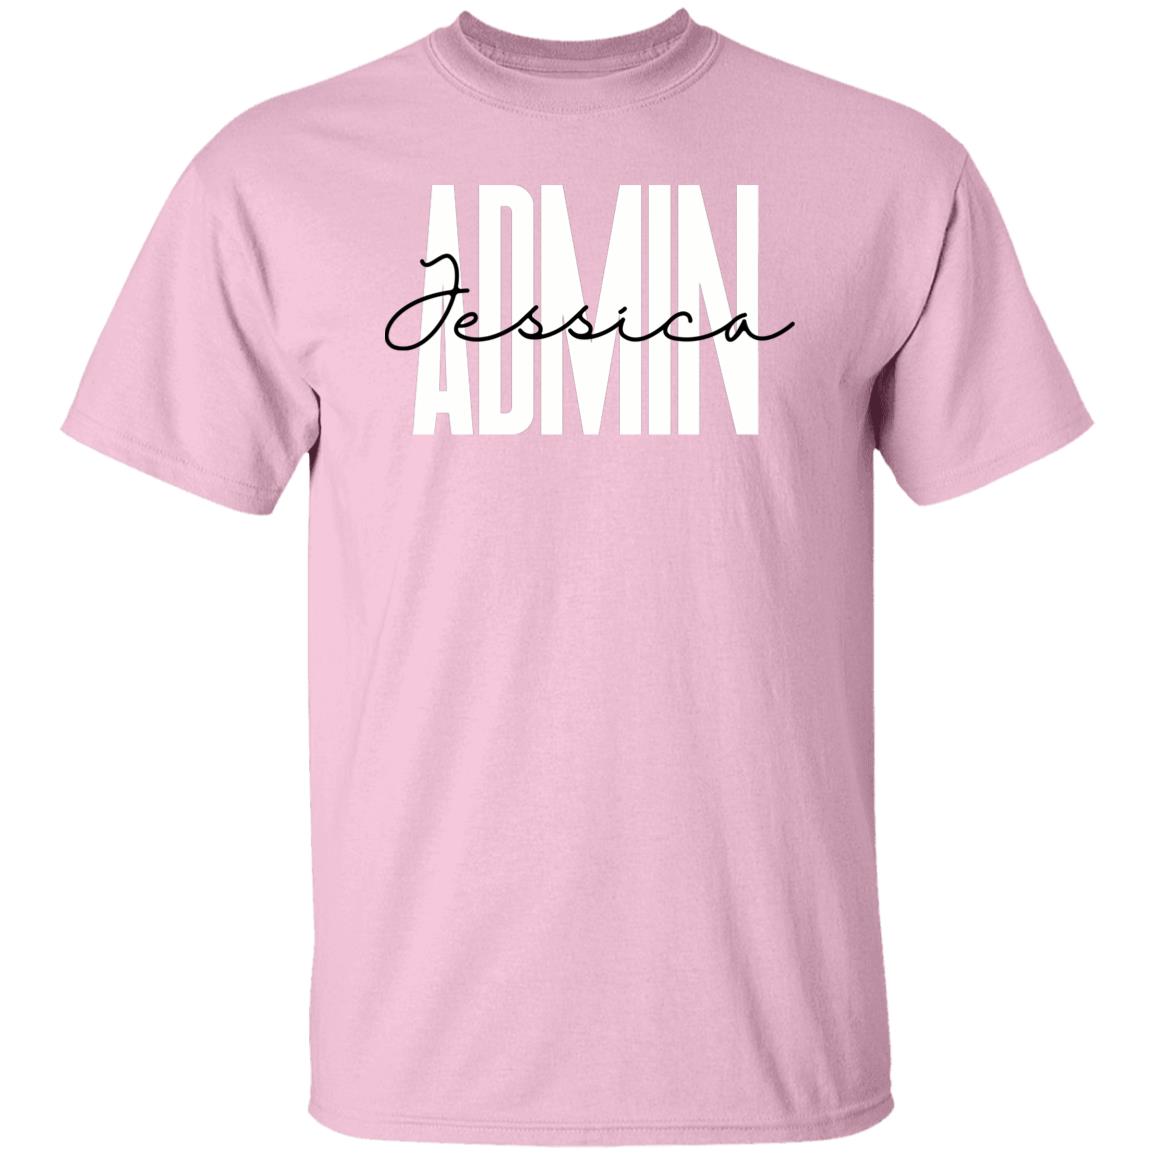 Personalized Admin Unisex T-shirt Custom name Administrator Sand Blue Pink-Family-Gift-Planet